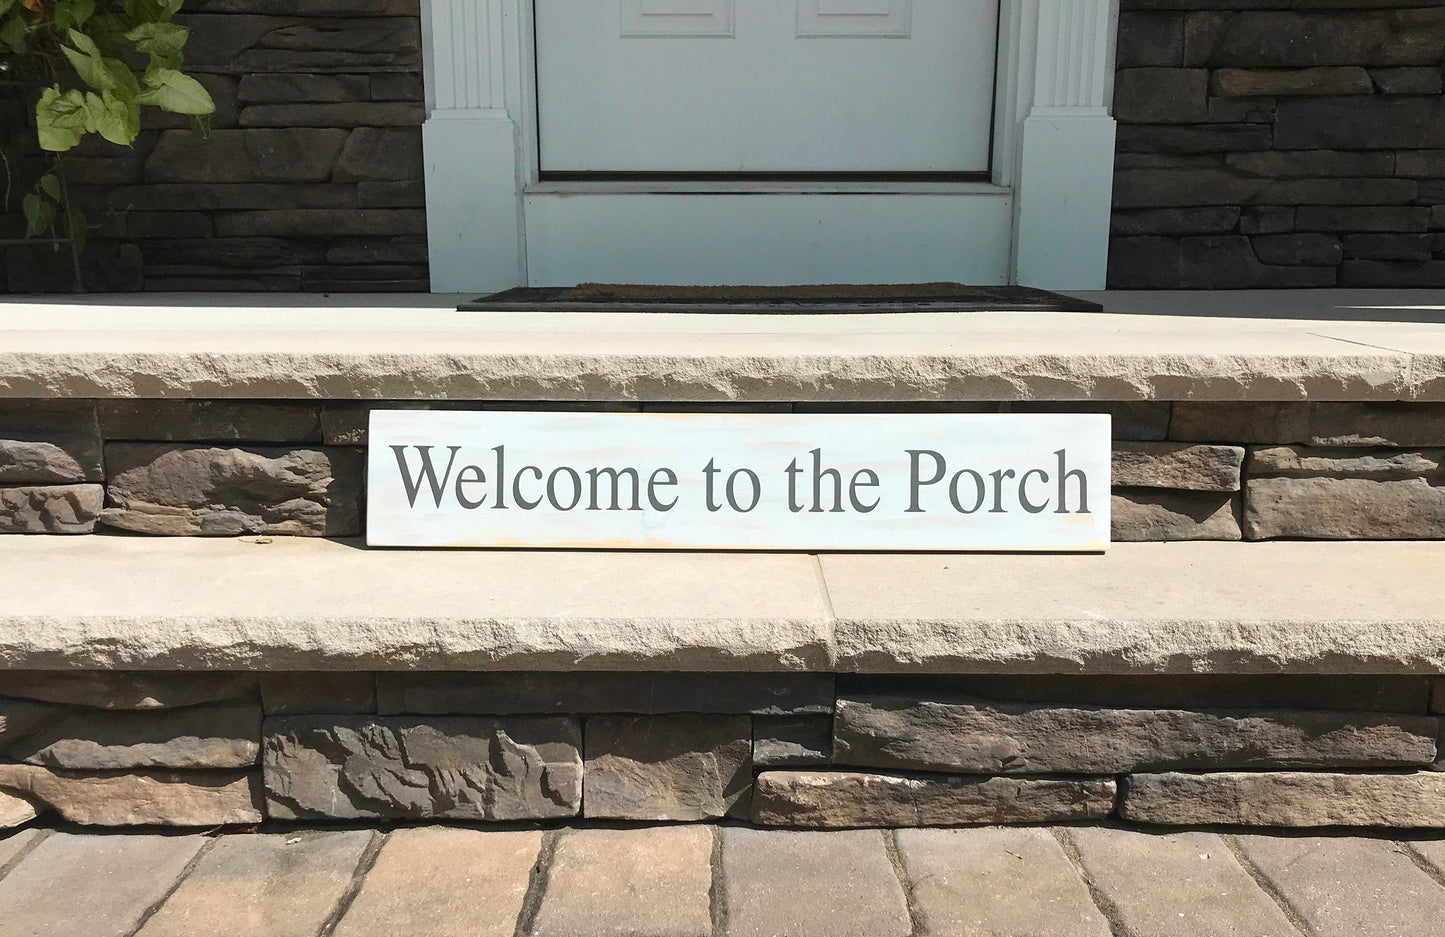 Welcome to the Porch, Outdoor Porch Sign, Rustic Farmhouse Look